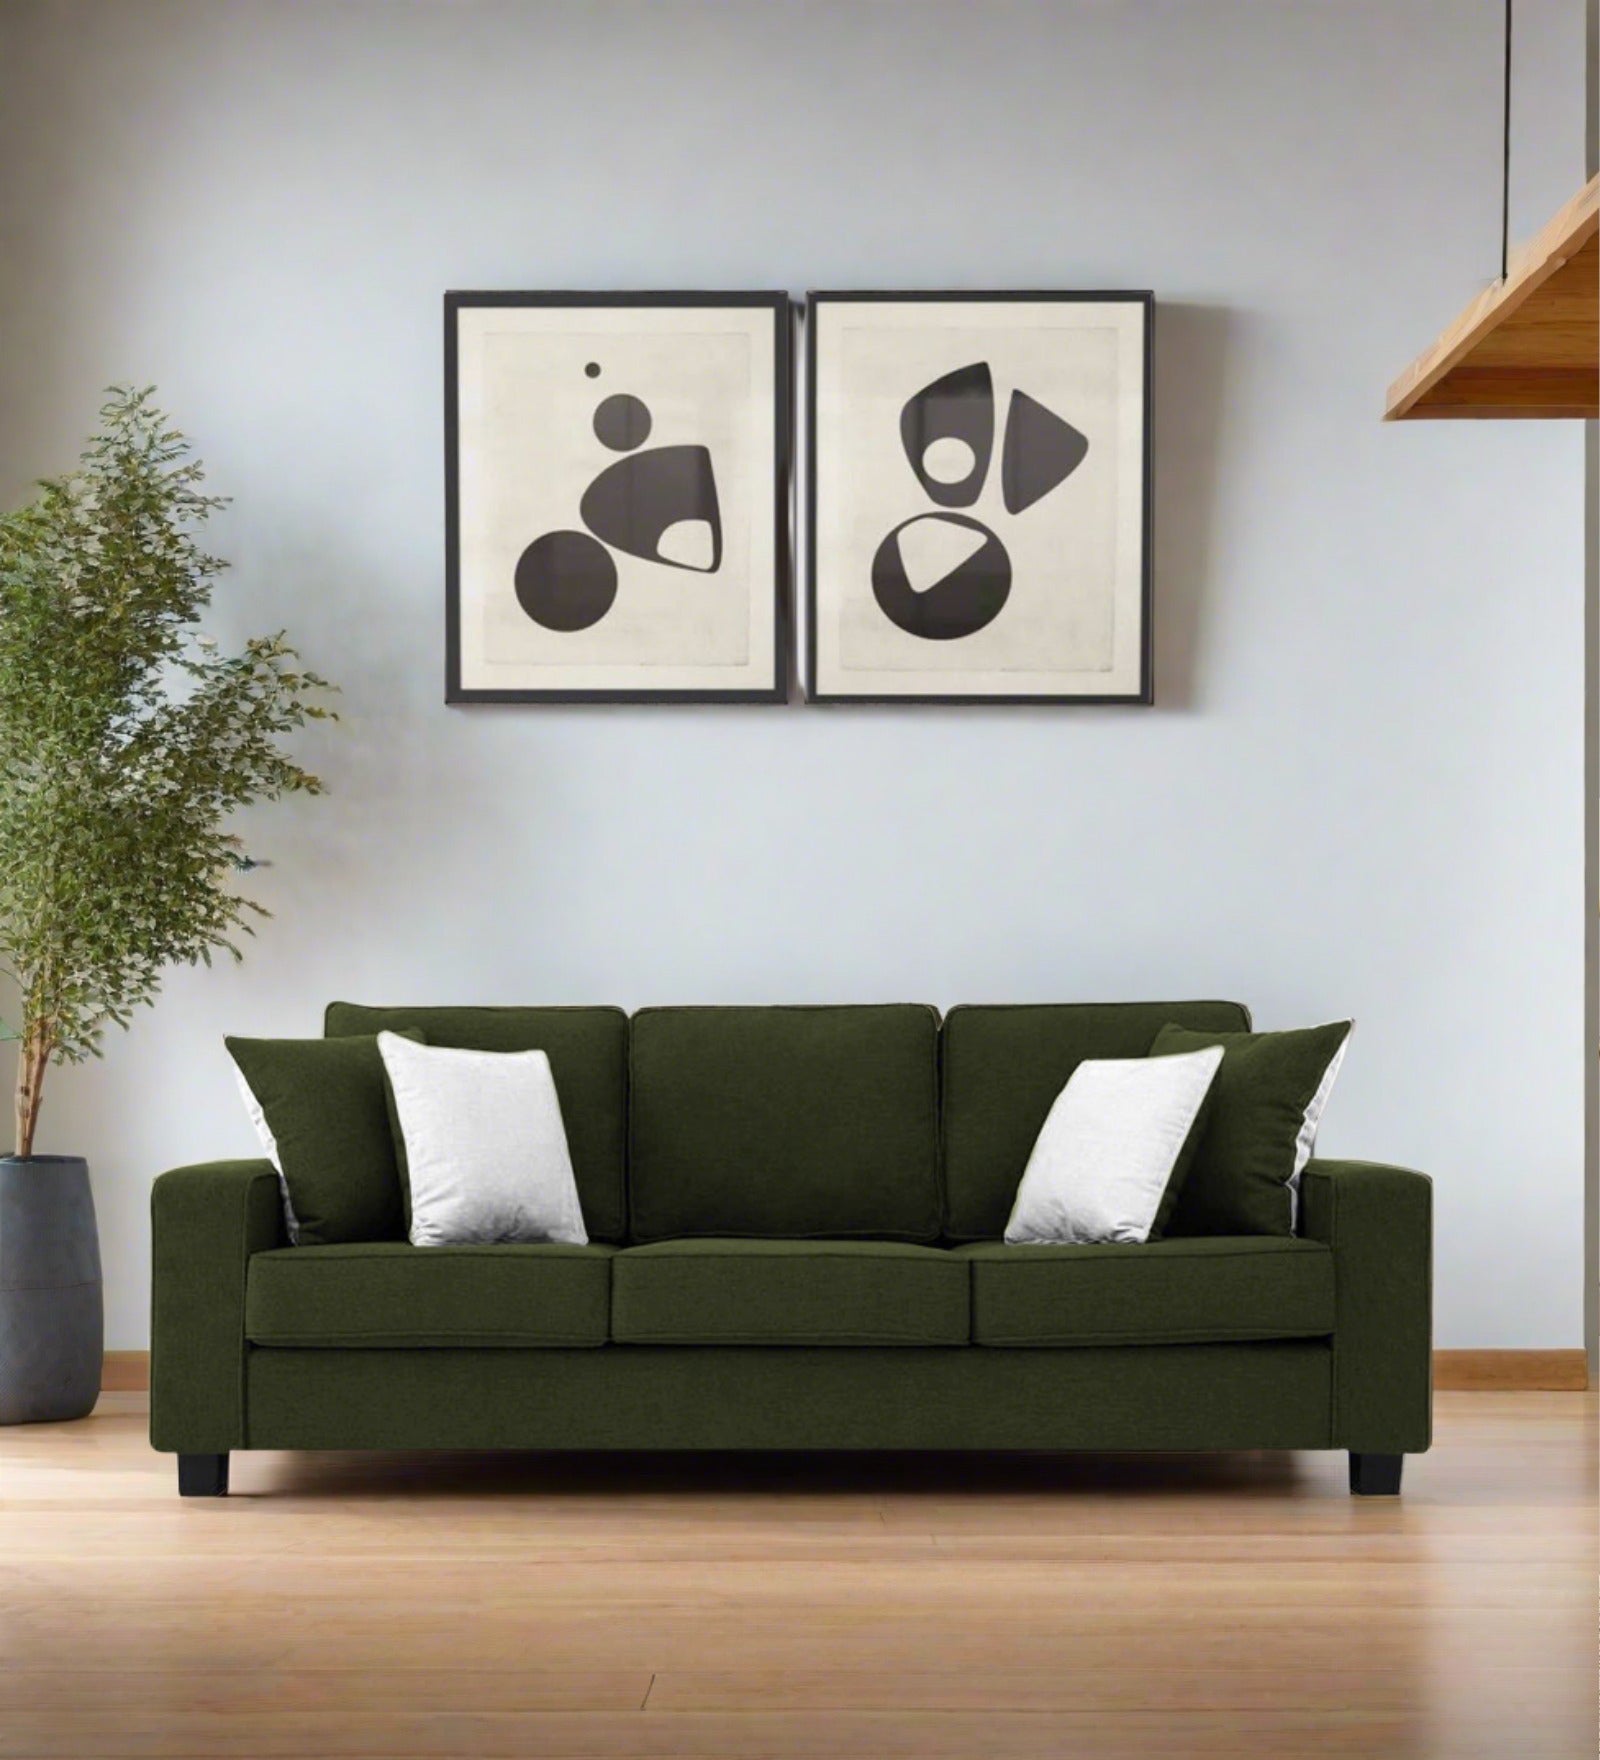 Ladybug Fabric 3 Seater Sofa In Olive Green Colour